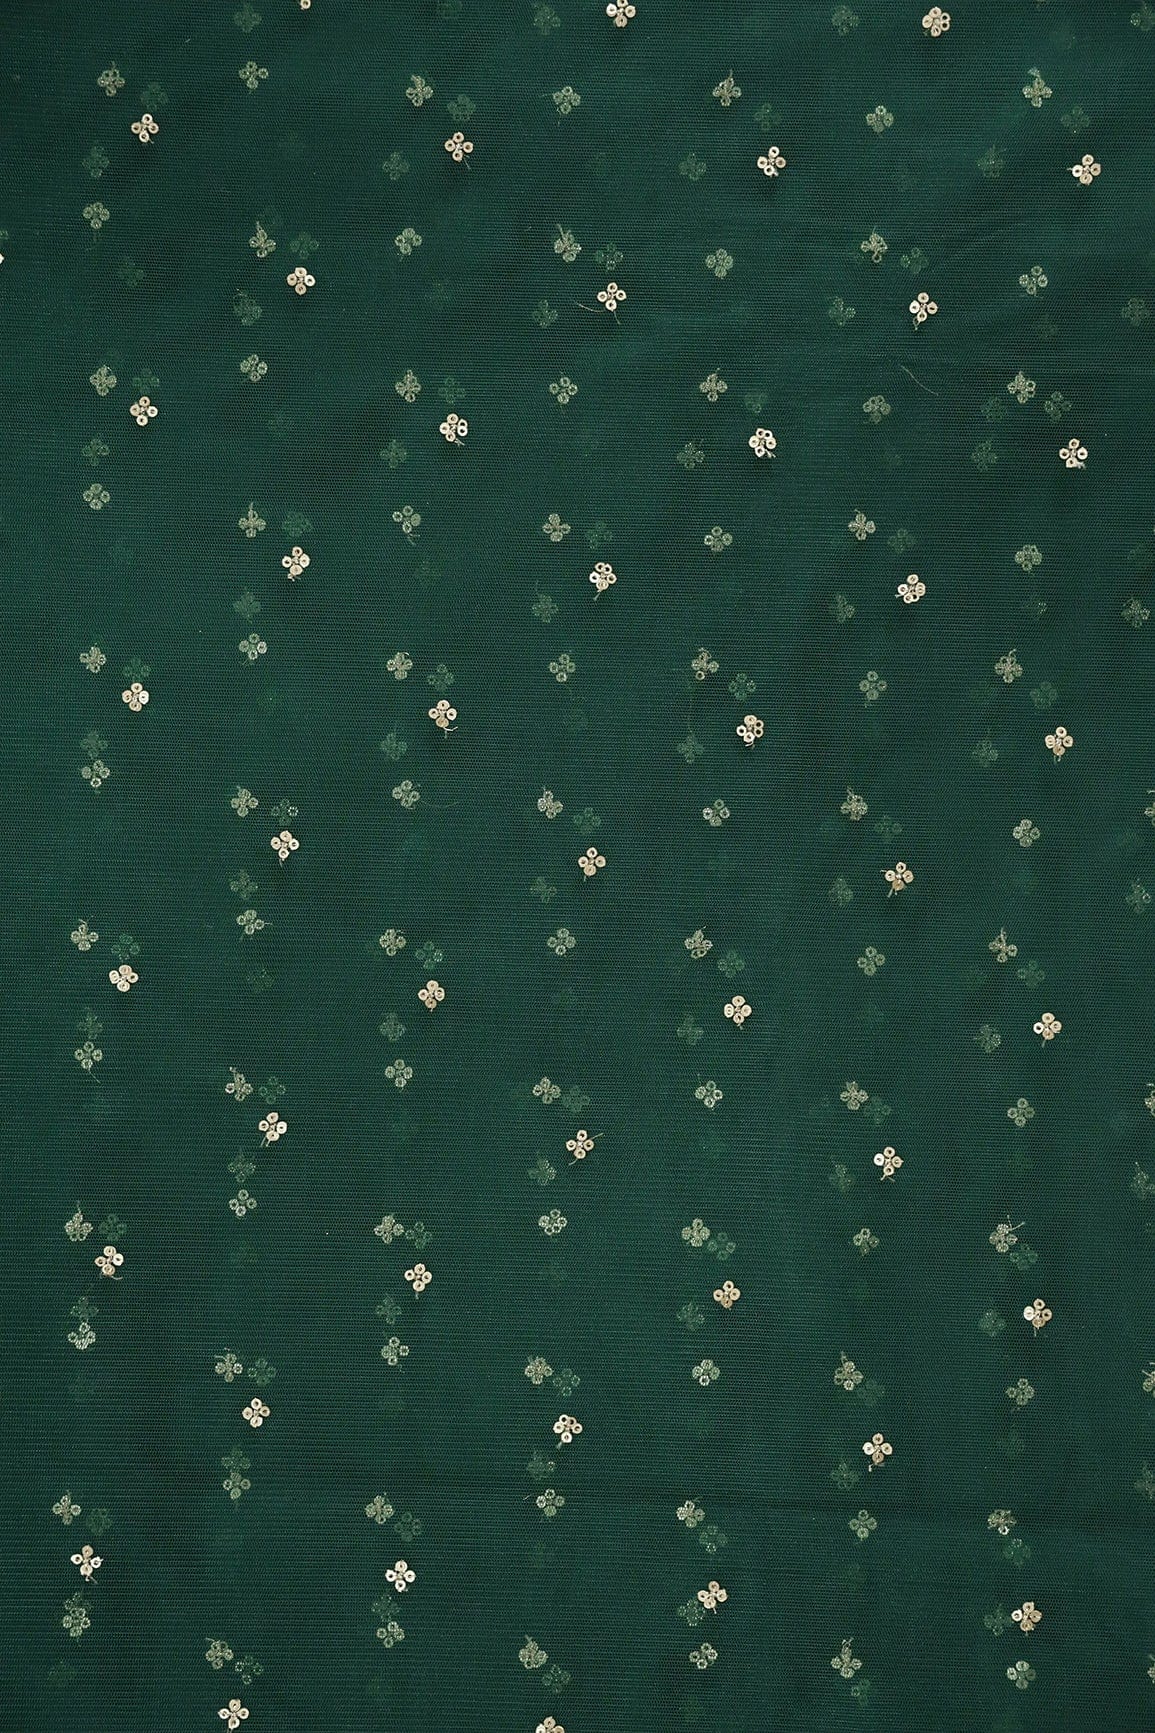 doeraa Embroidery Fabrics Gold Sequins Small Motif Embroidery Work On Bottle Green Soft Net Fabric